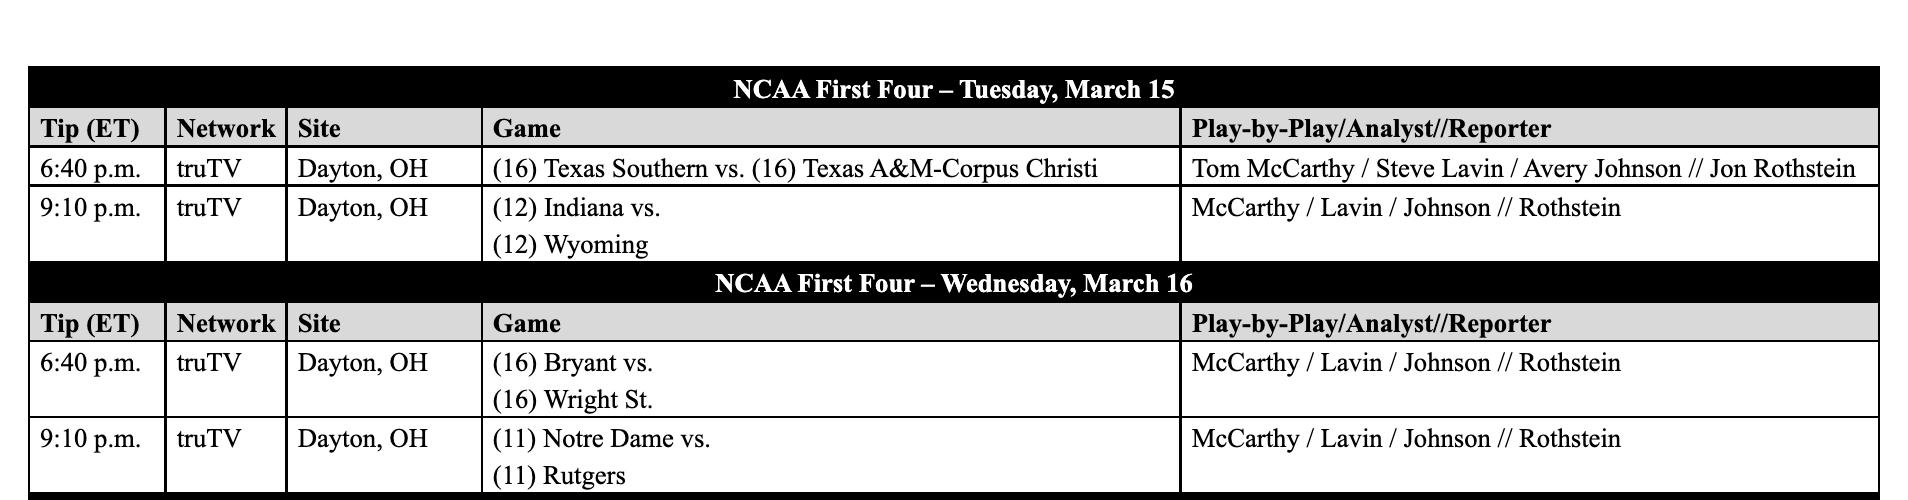 Matt Norlander on Twitter: "JUST IN: MEN'S NCAA TOURNAMENT TIP TIMES,  SITES, ANNOUNCING TEAMS. Here is the CBS, TBS, TNT and truTV schedule for  the First Four, plus all first round games